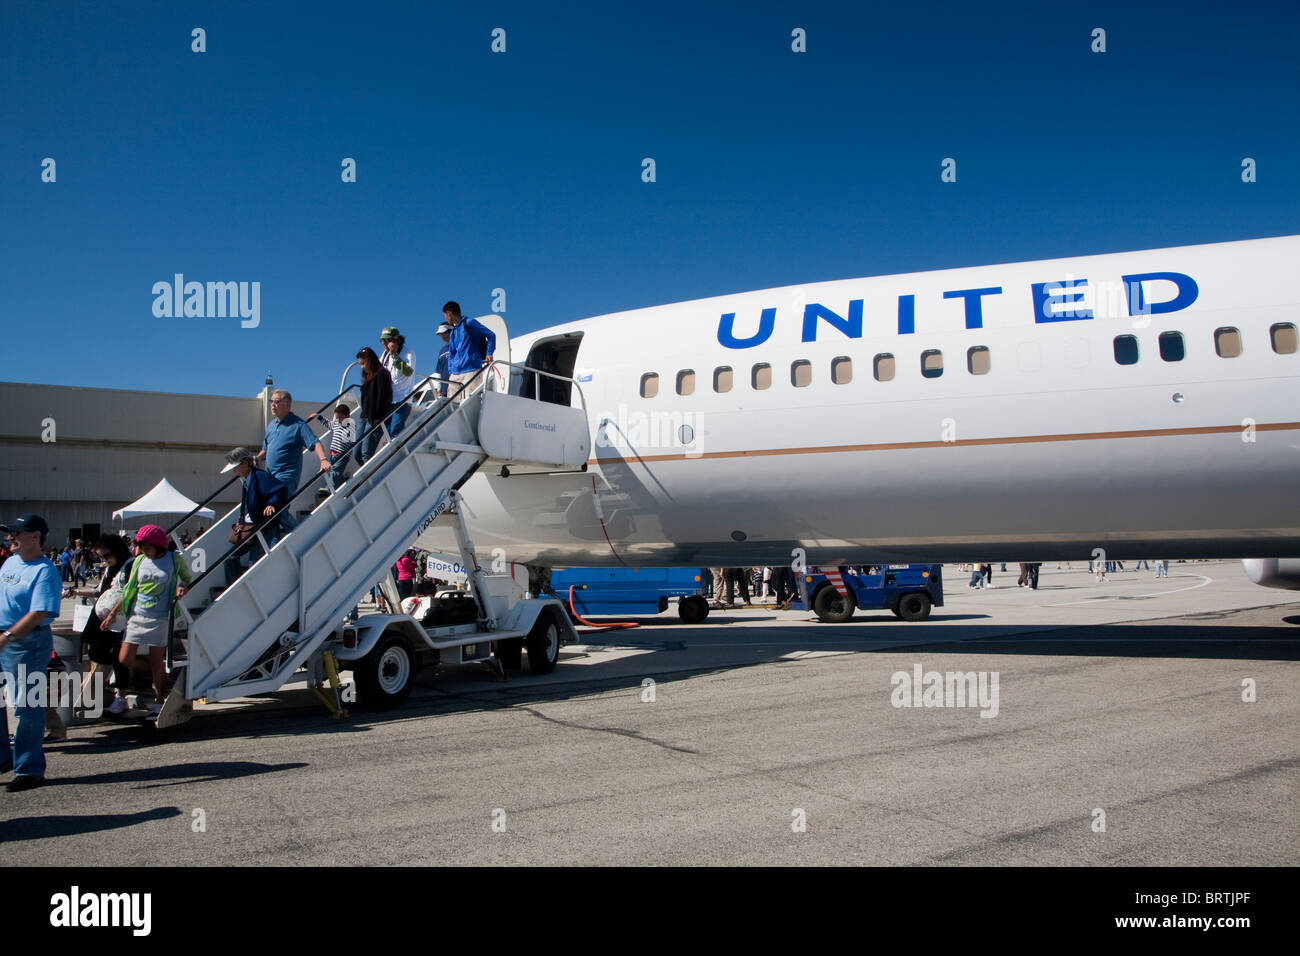 Plane on display at United's 5th Annual Family Day, October 10, 2010. Continental Airlines just merged with United Airlines. Stock Photo